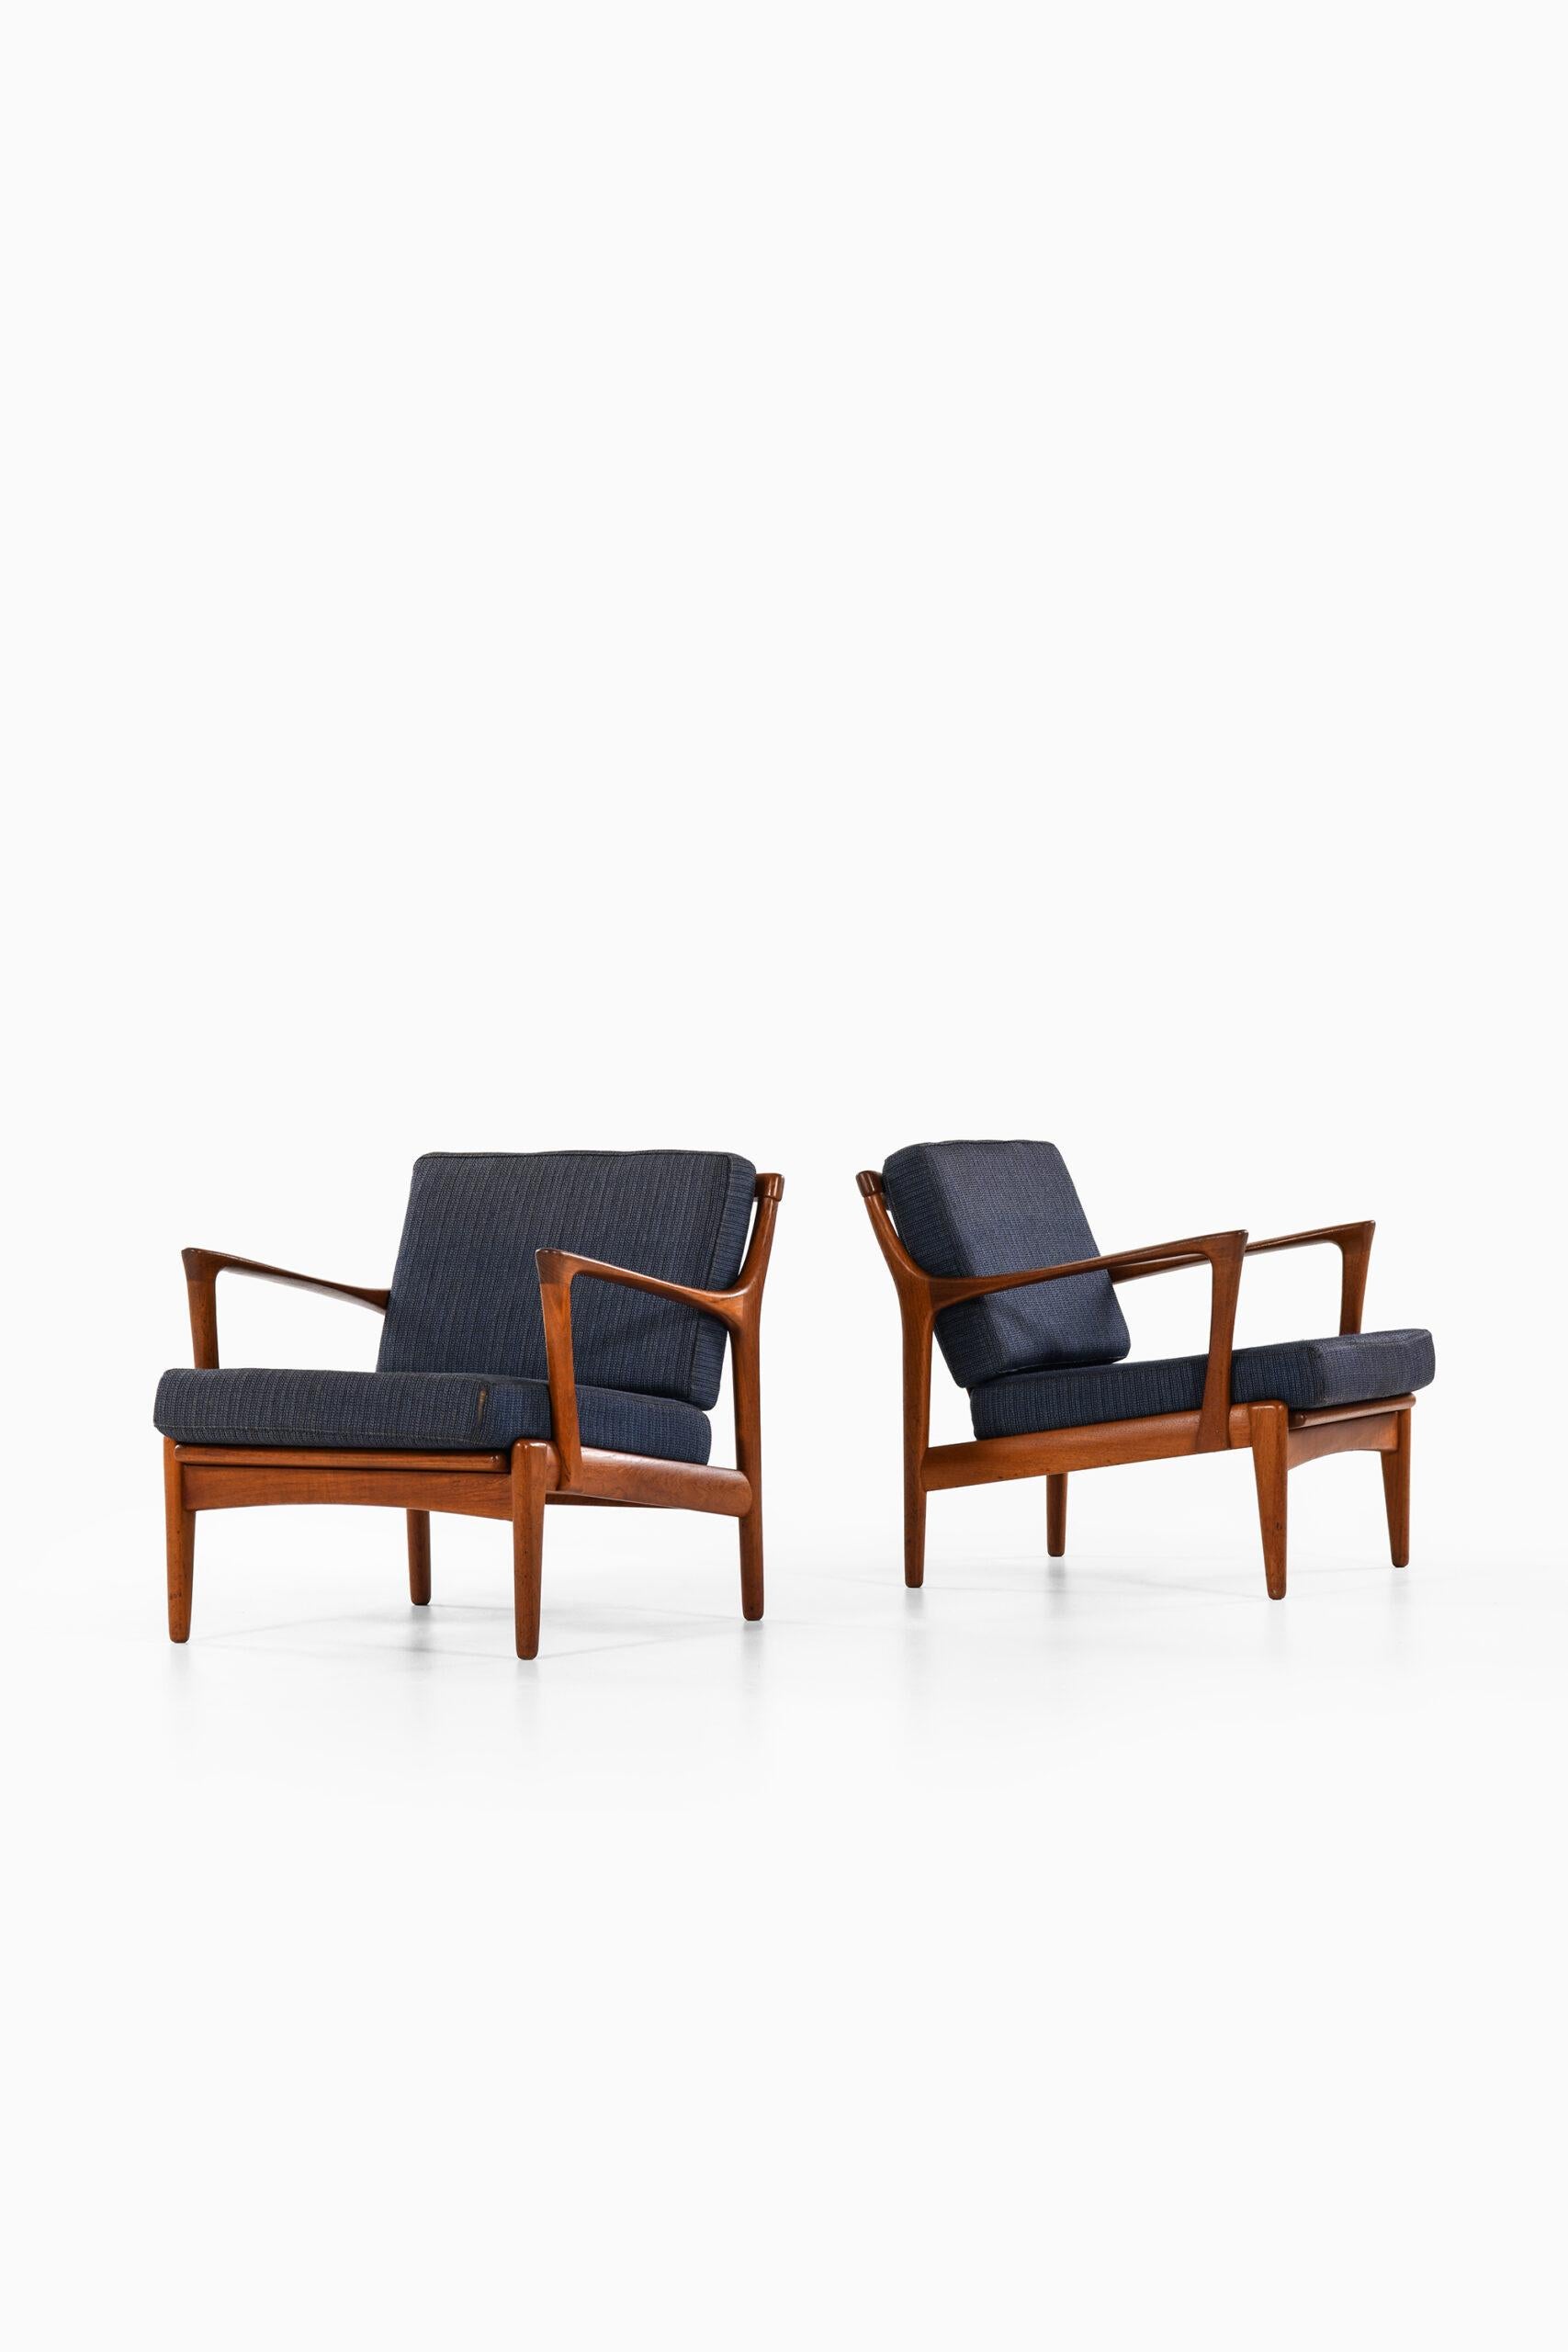 Pair of easy chairs model Kuba designed by Bertil Fridhagen. Produced by Bröderna Andersson in Sweden.